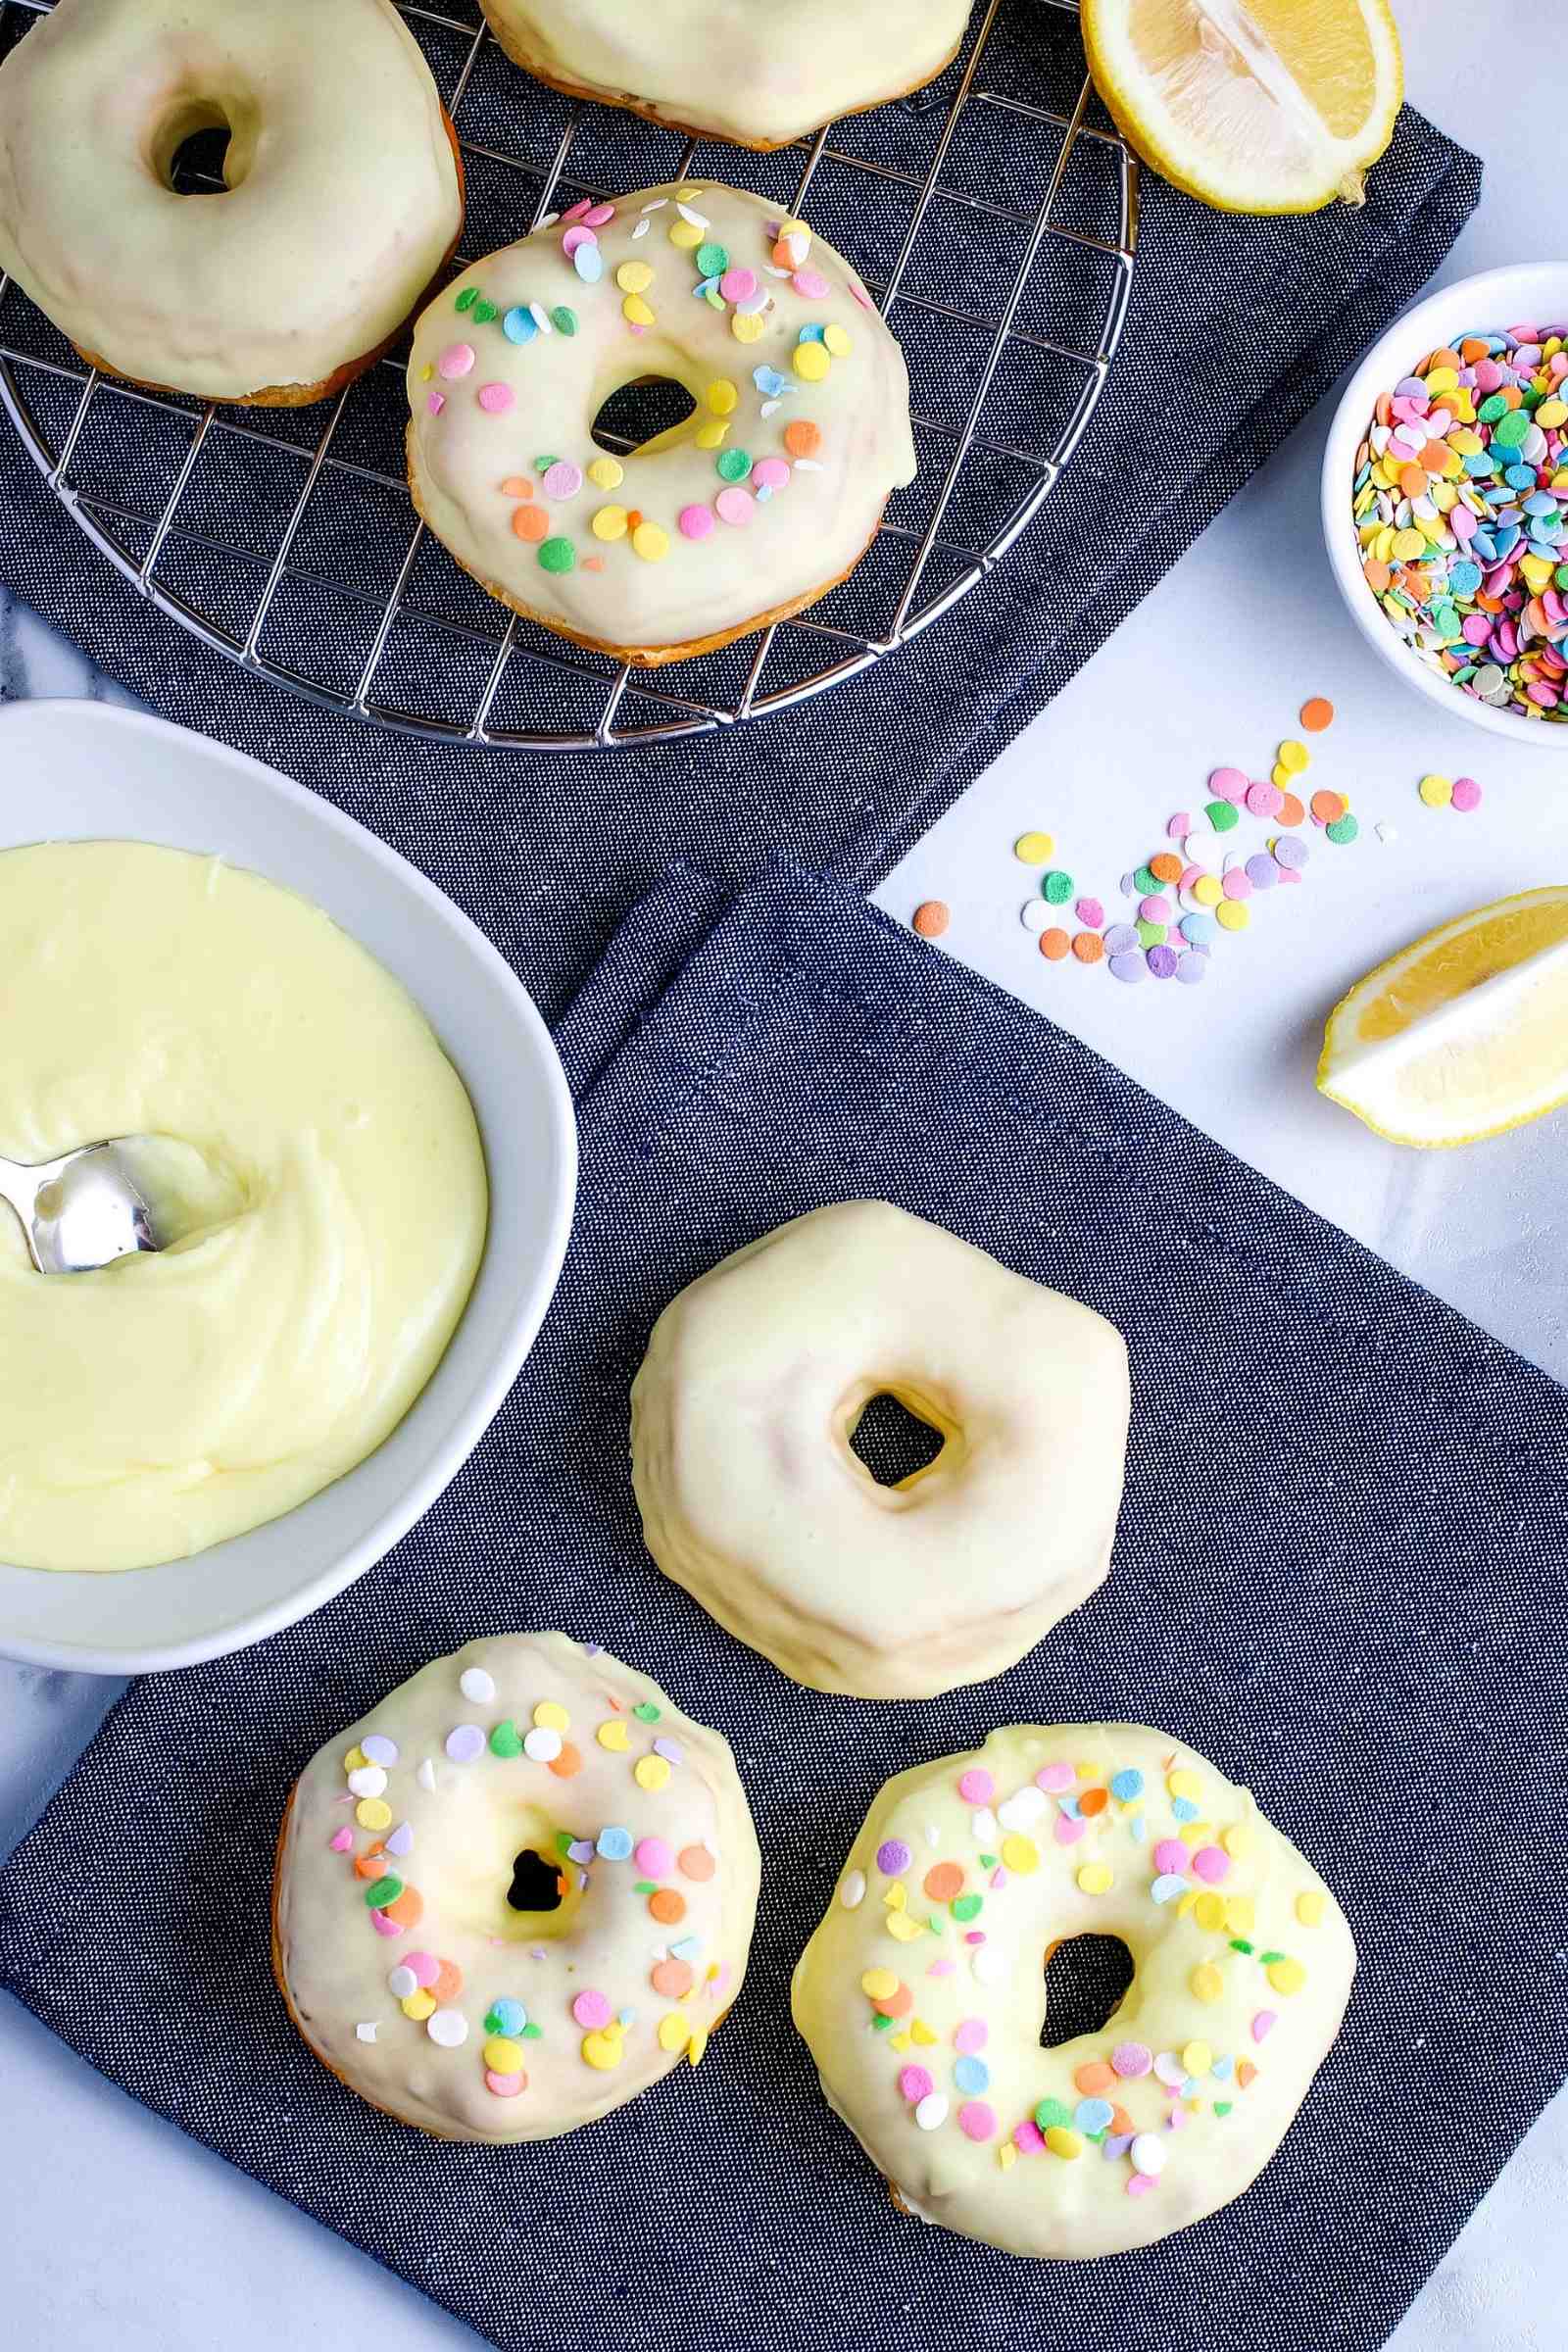 frosted donuts with sprinkles on a black napkin with bowls of frosting and sprinkles